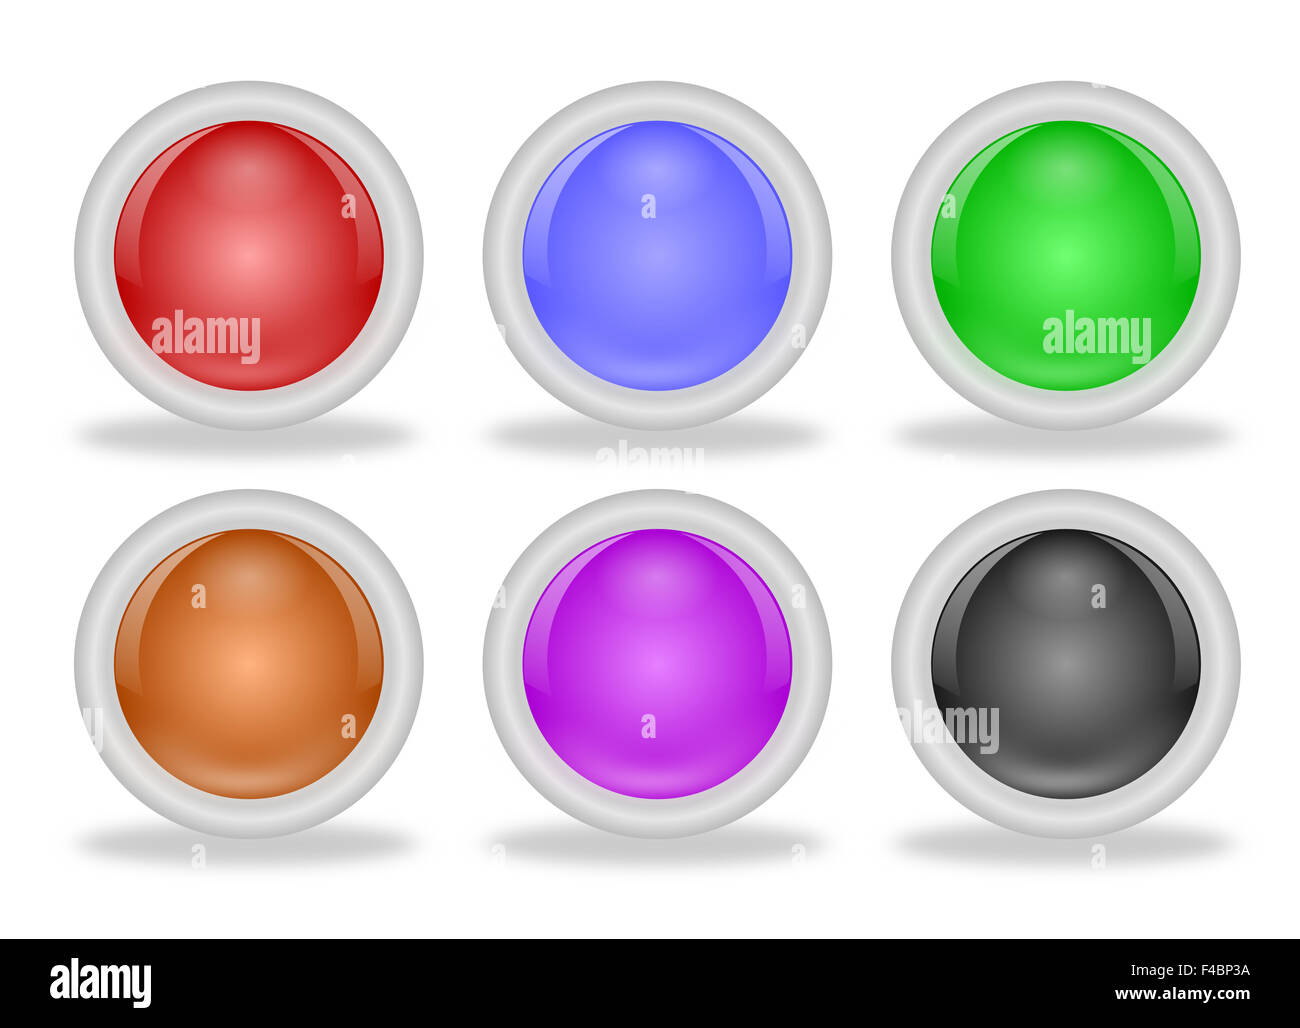 Shiny Blank Web Buttons with Beveled Frames Stock Photo